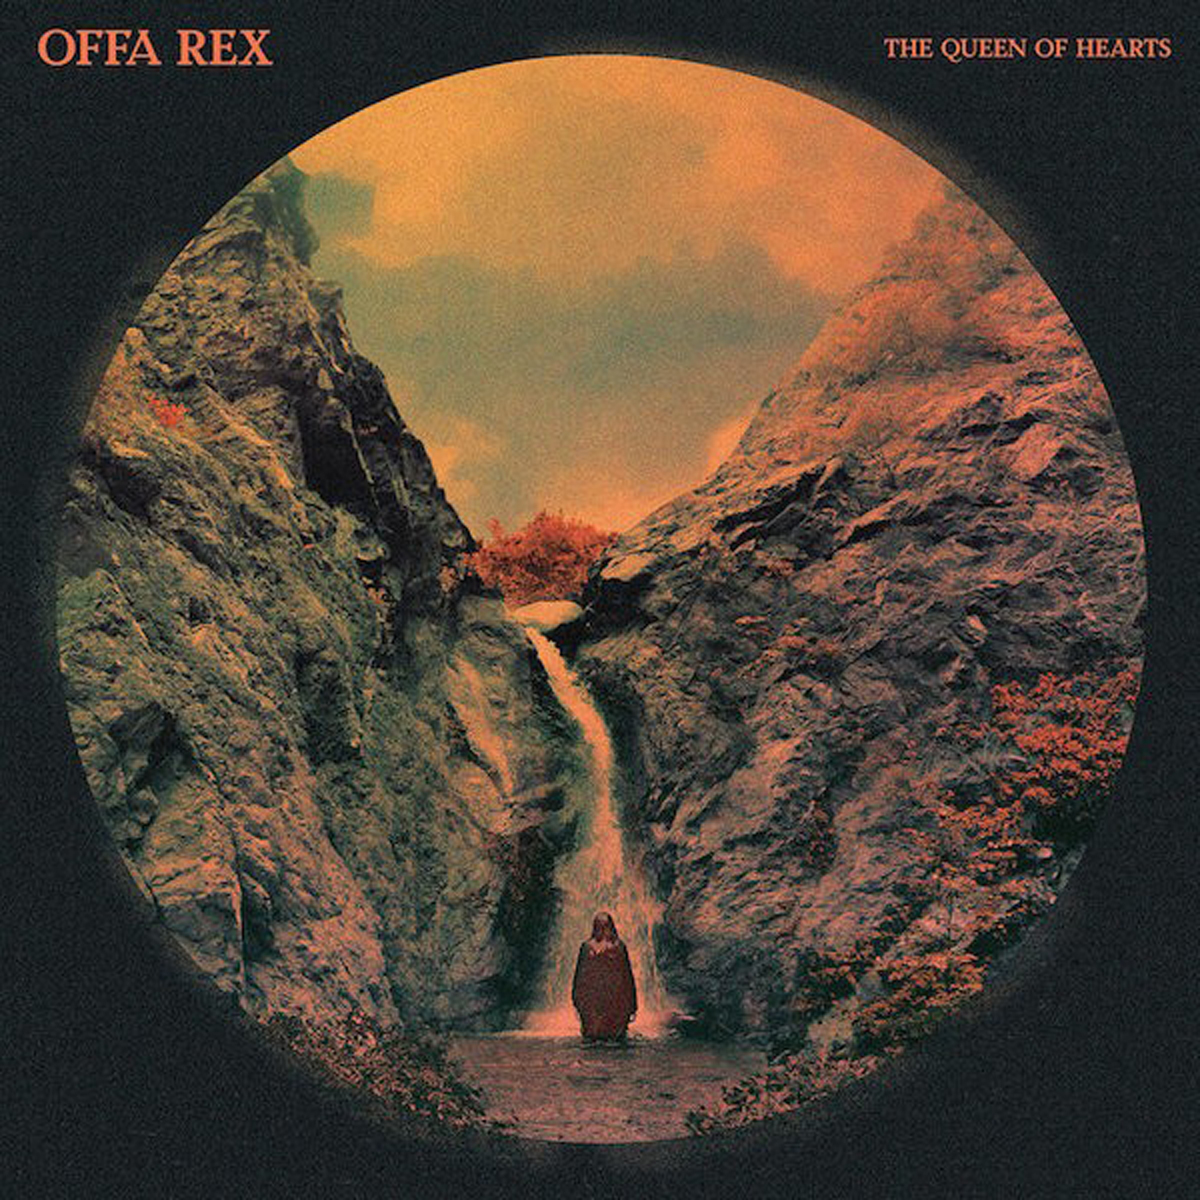 The Decemberists And Olivia Chaney Team Up For Side-Project Offa Rex, Perform First Single